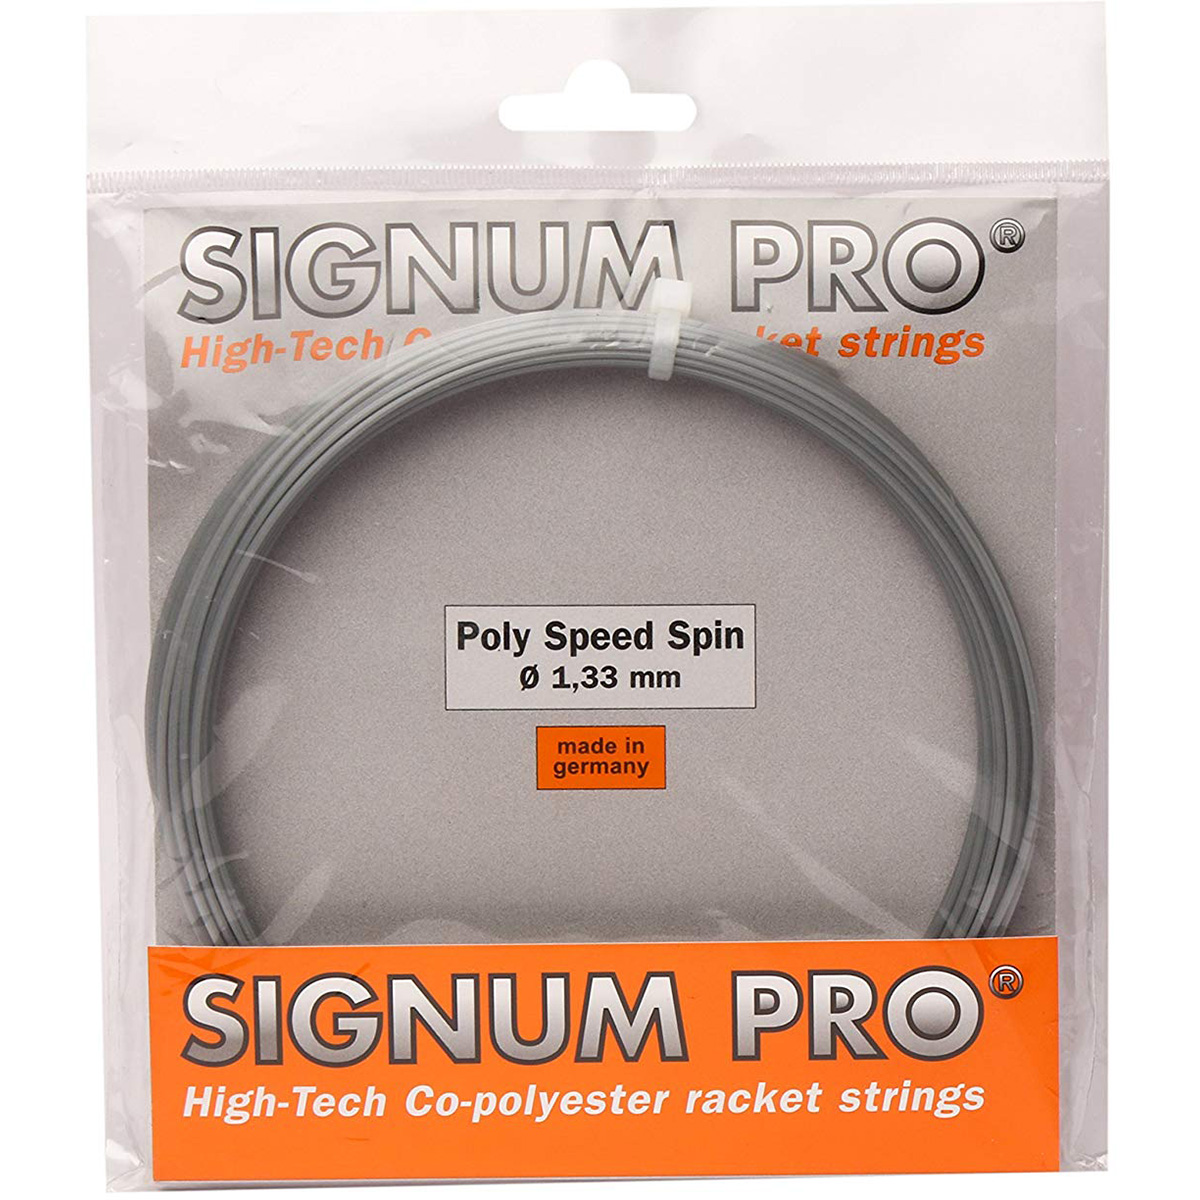 Signum Pro Poly Speed Spin 16 String Set (12 m) - Silver